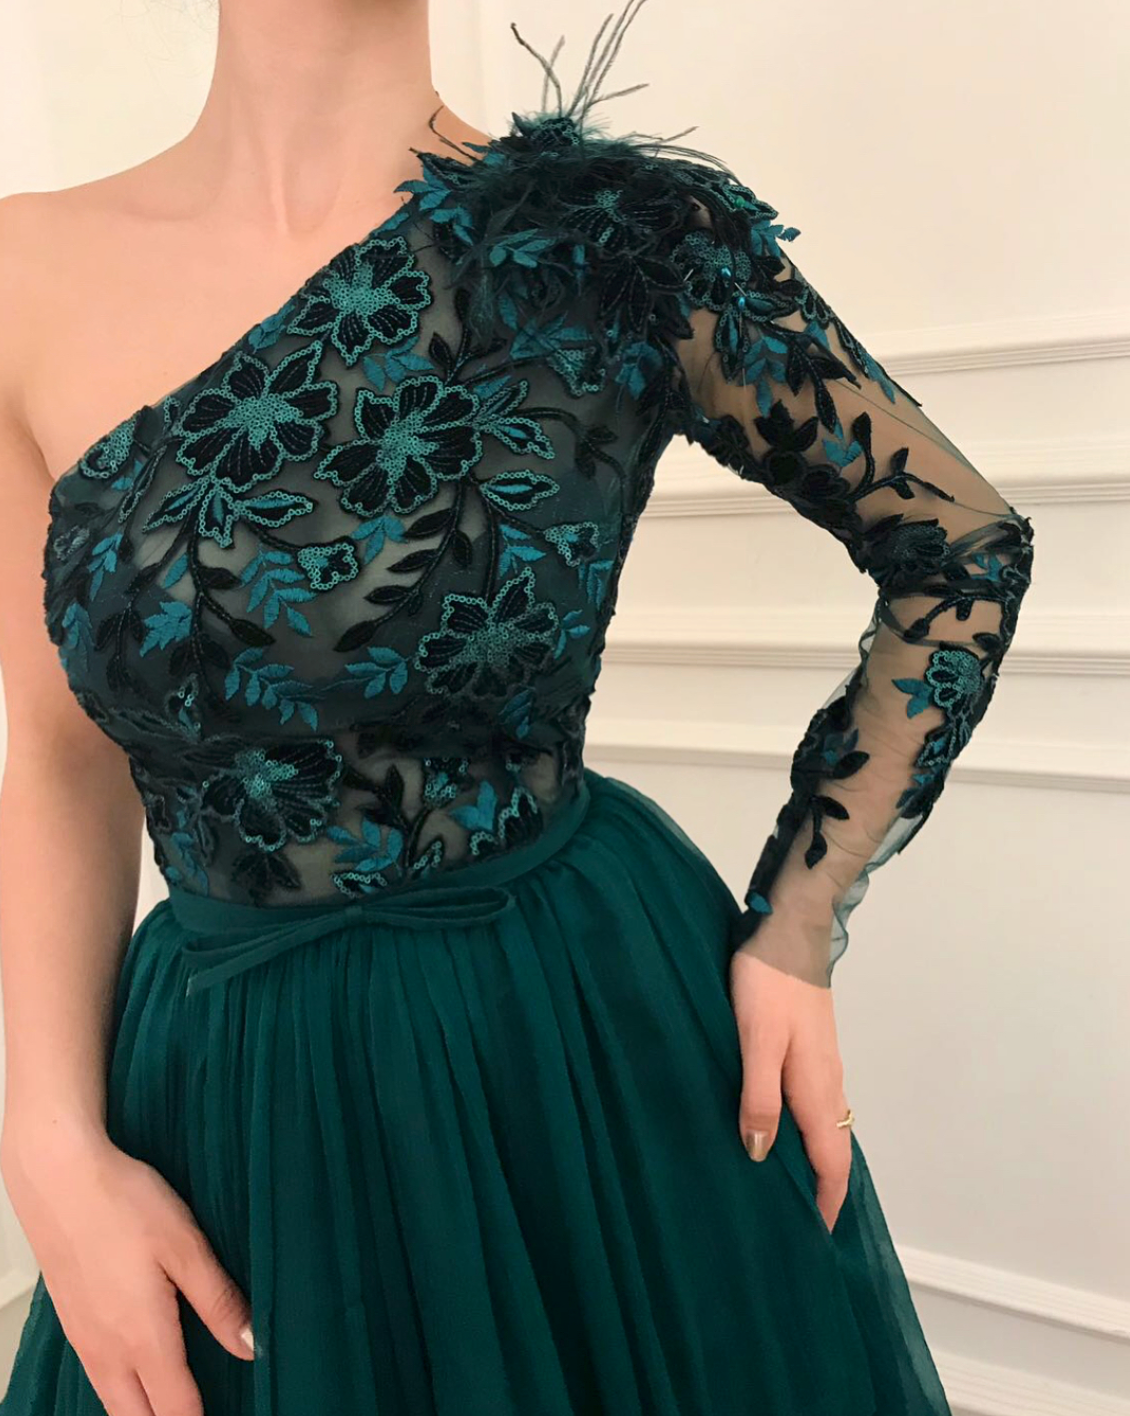 Green A-Line dress with one long sleeve and embroidery